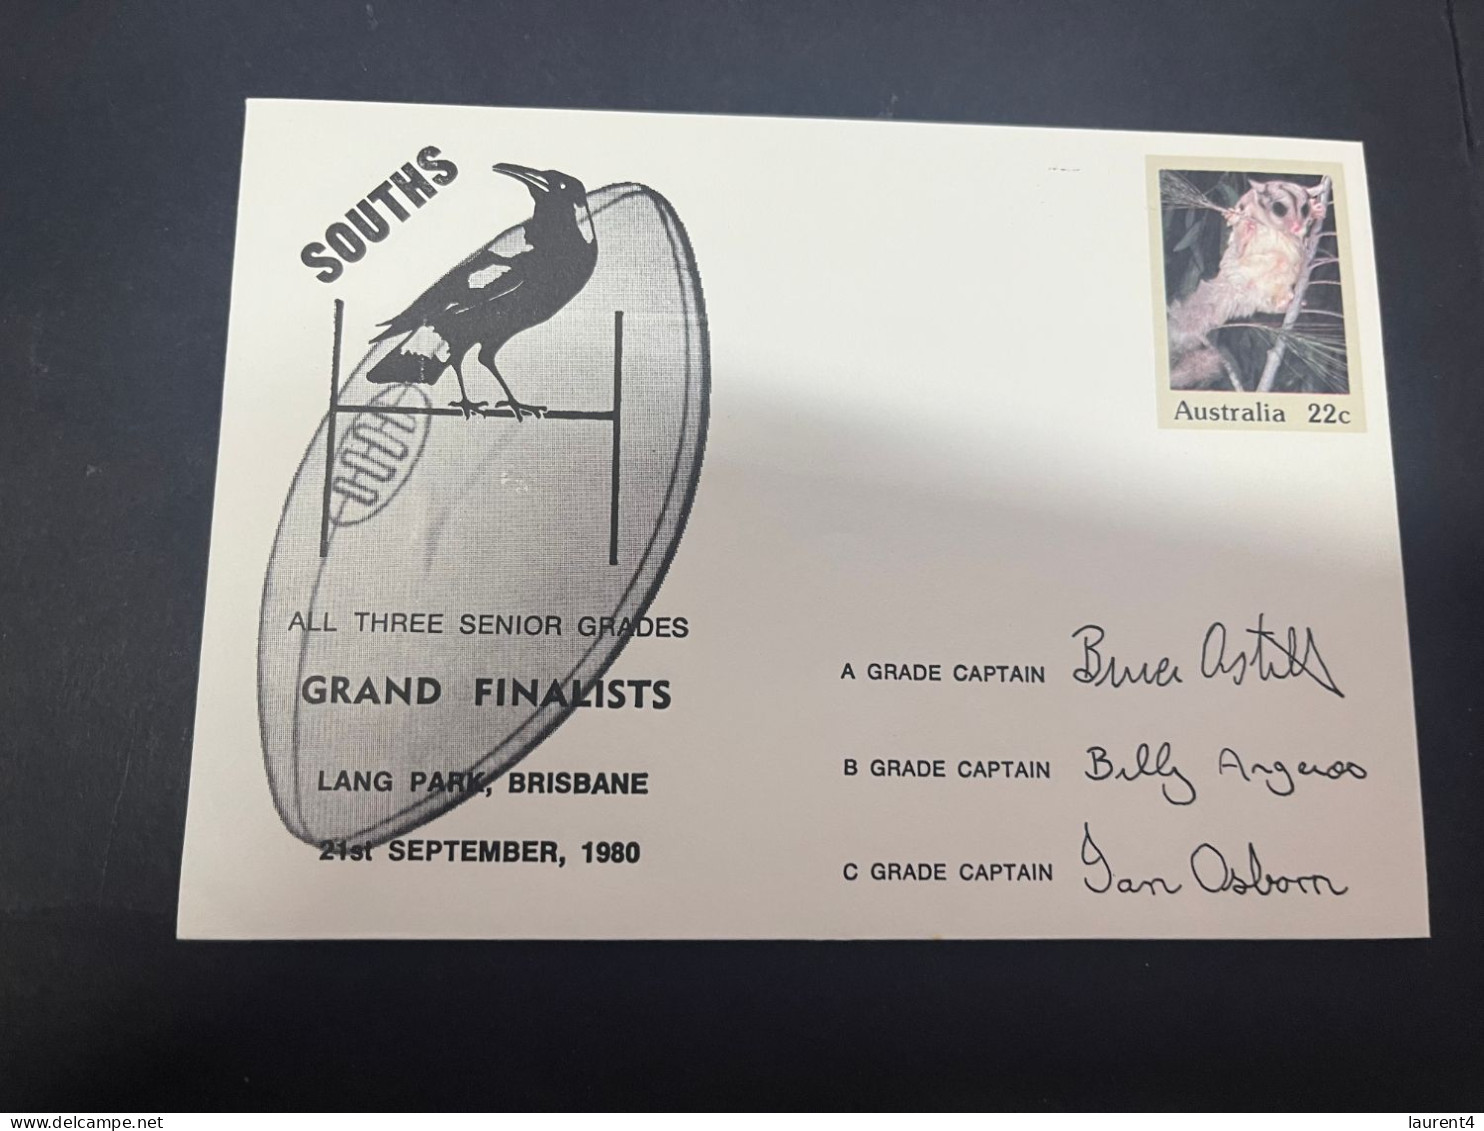 1-5-2023 (3 Z 39) Australia FDC (1 Covers) 1980 - OZ Football - South (magpies) Grand Finalists (signed - Sugar Glider) - Sobre Primer Día (FDC)